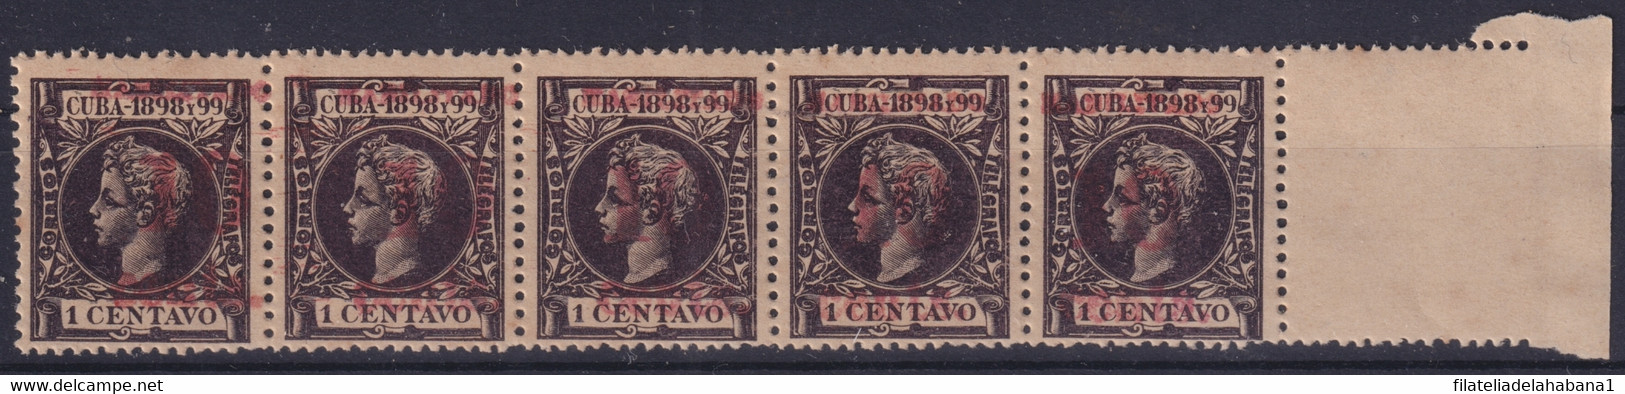 1899-486 CUBA 1899 10c S. 1c US OCCUPATION 4th ISSUE COMPLETE TRIP PHILATELIC FORGERY. - Ongebruikt